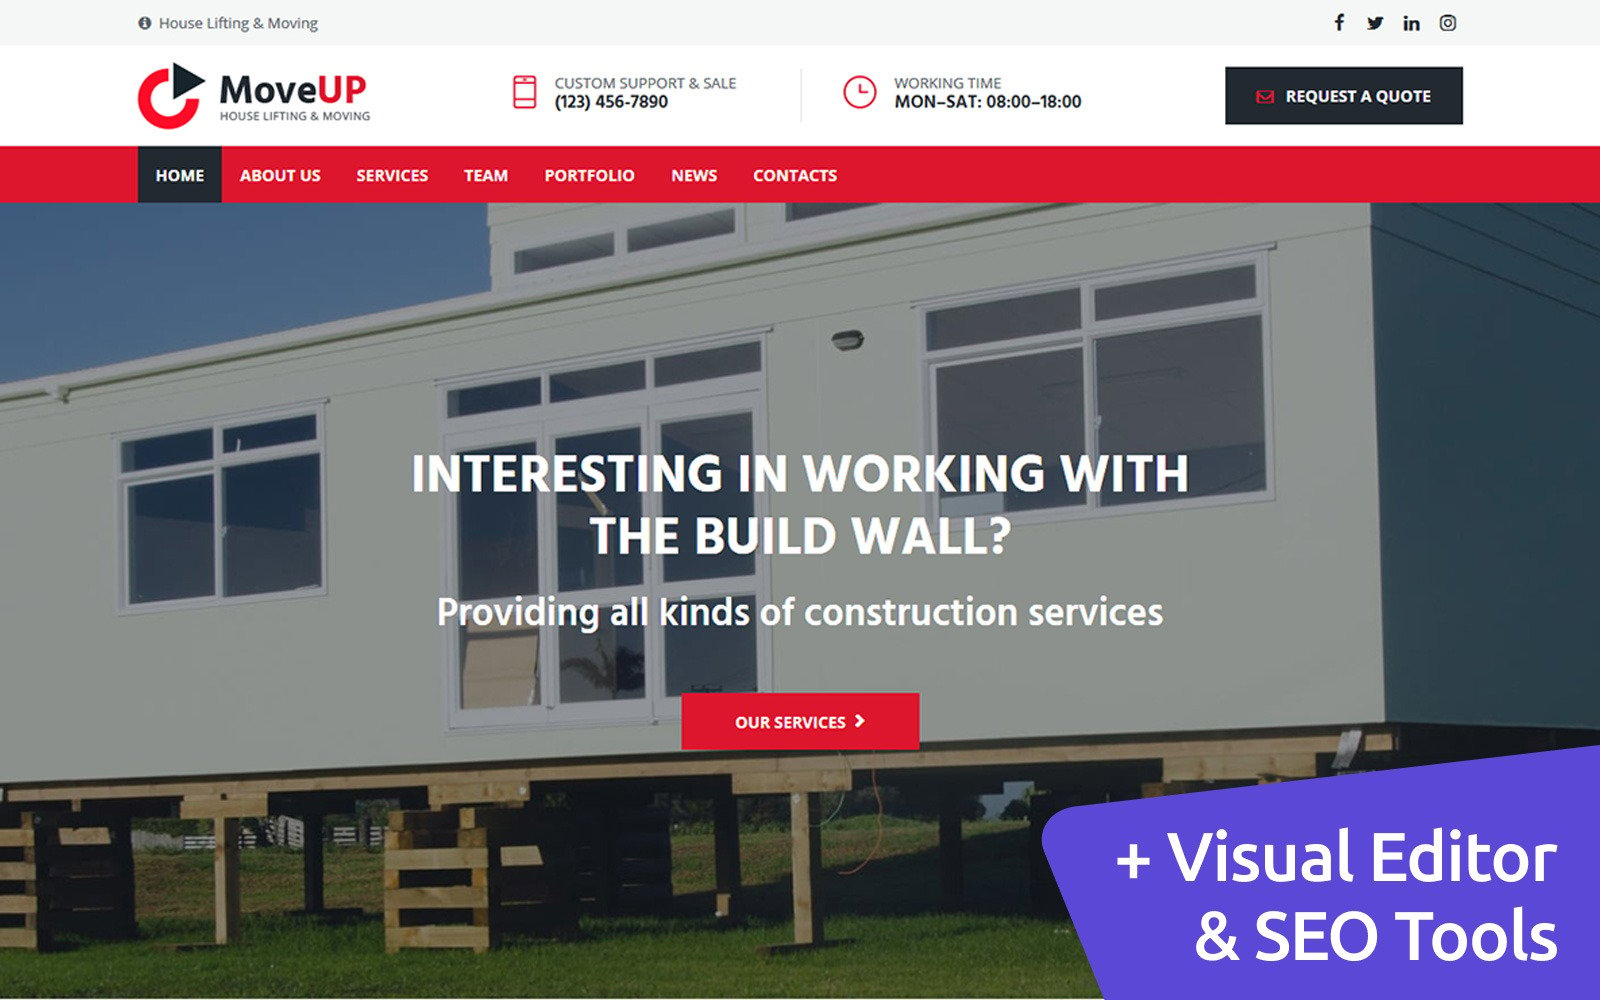 House Lifting and Moving Company  Plus Website Builder 113522